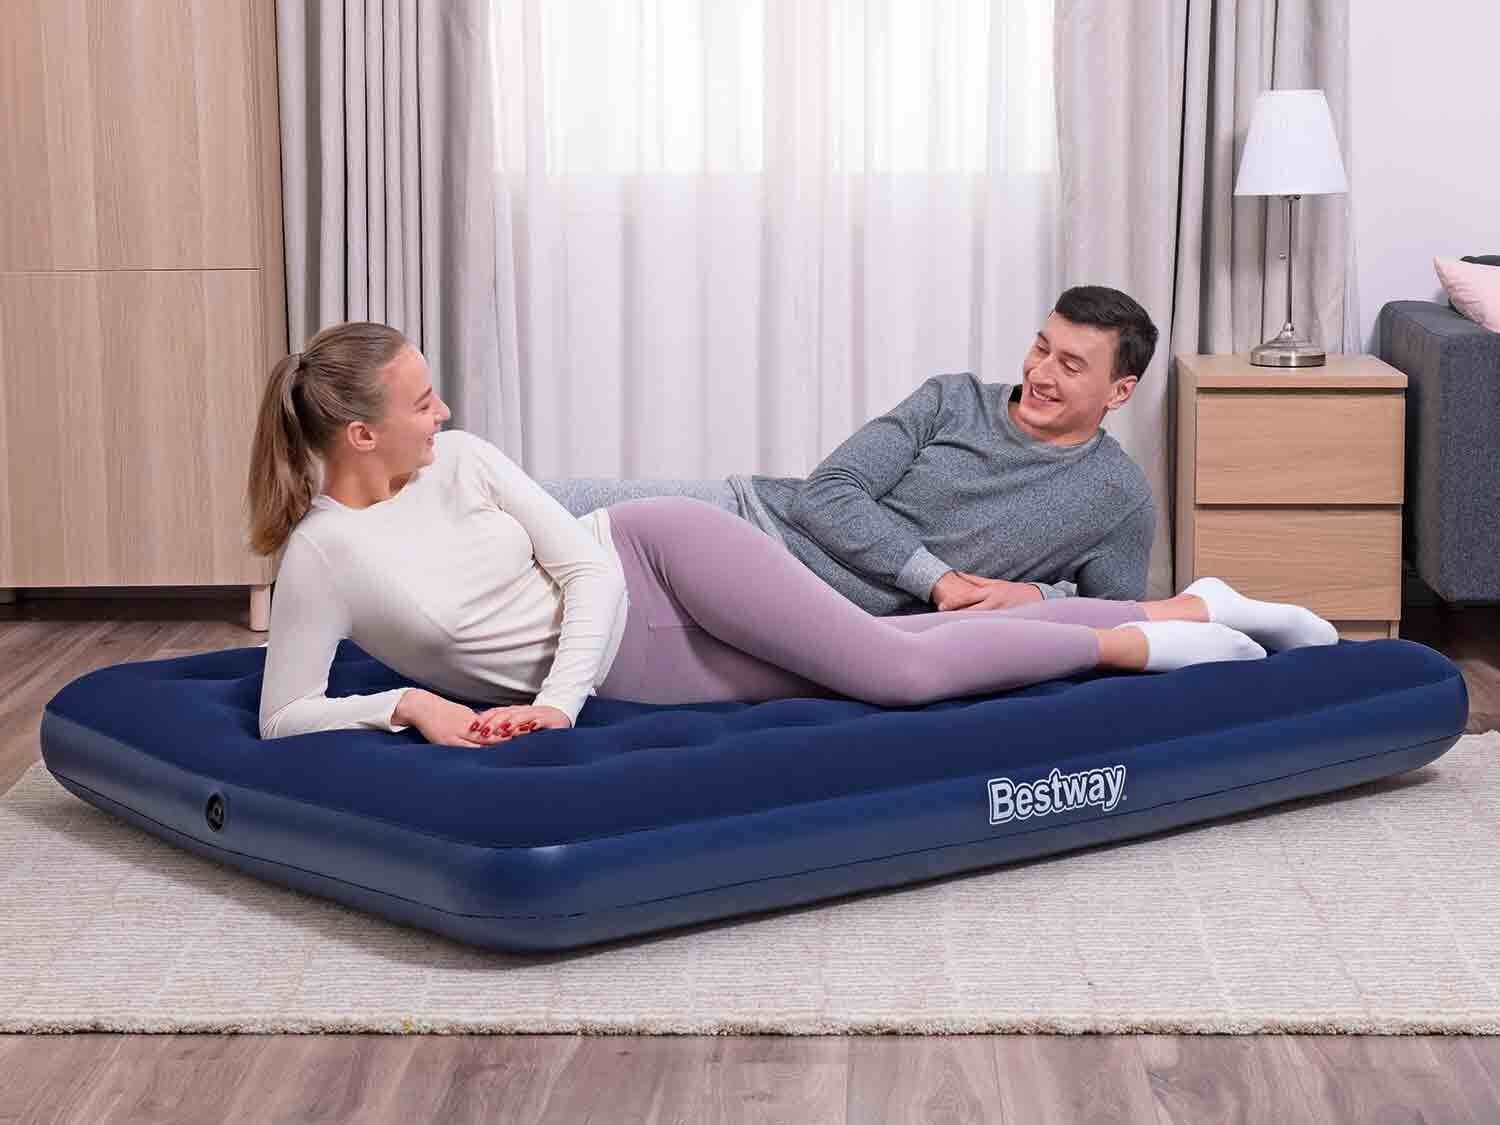 BestWay Cama doble inflable